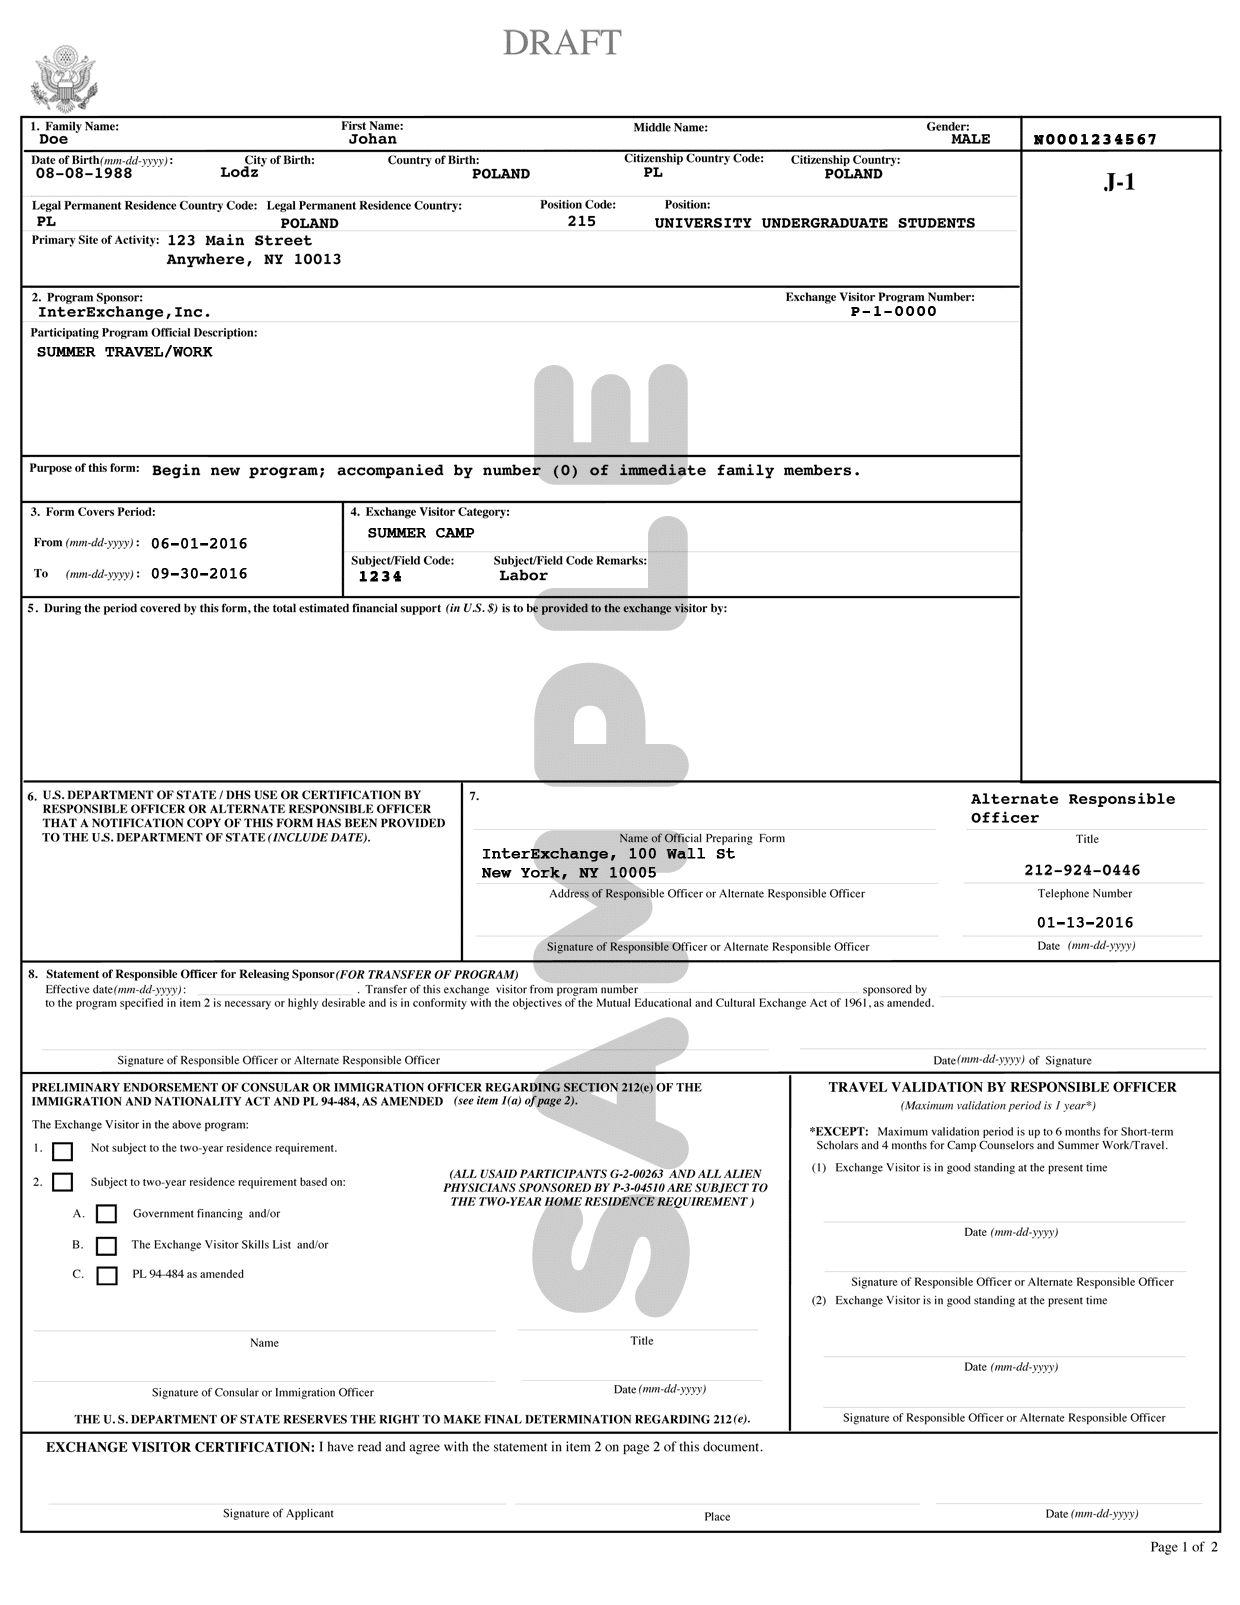 Sample DS-2019 form document